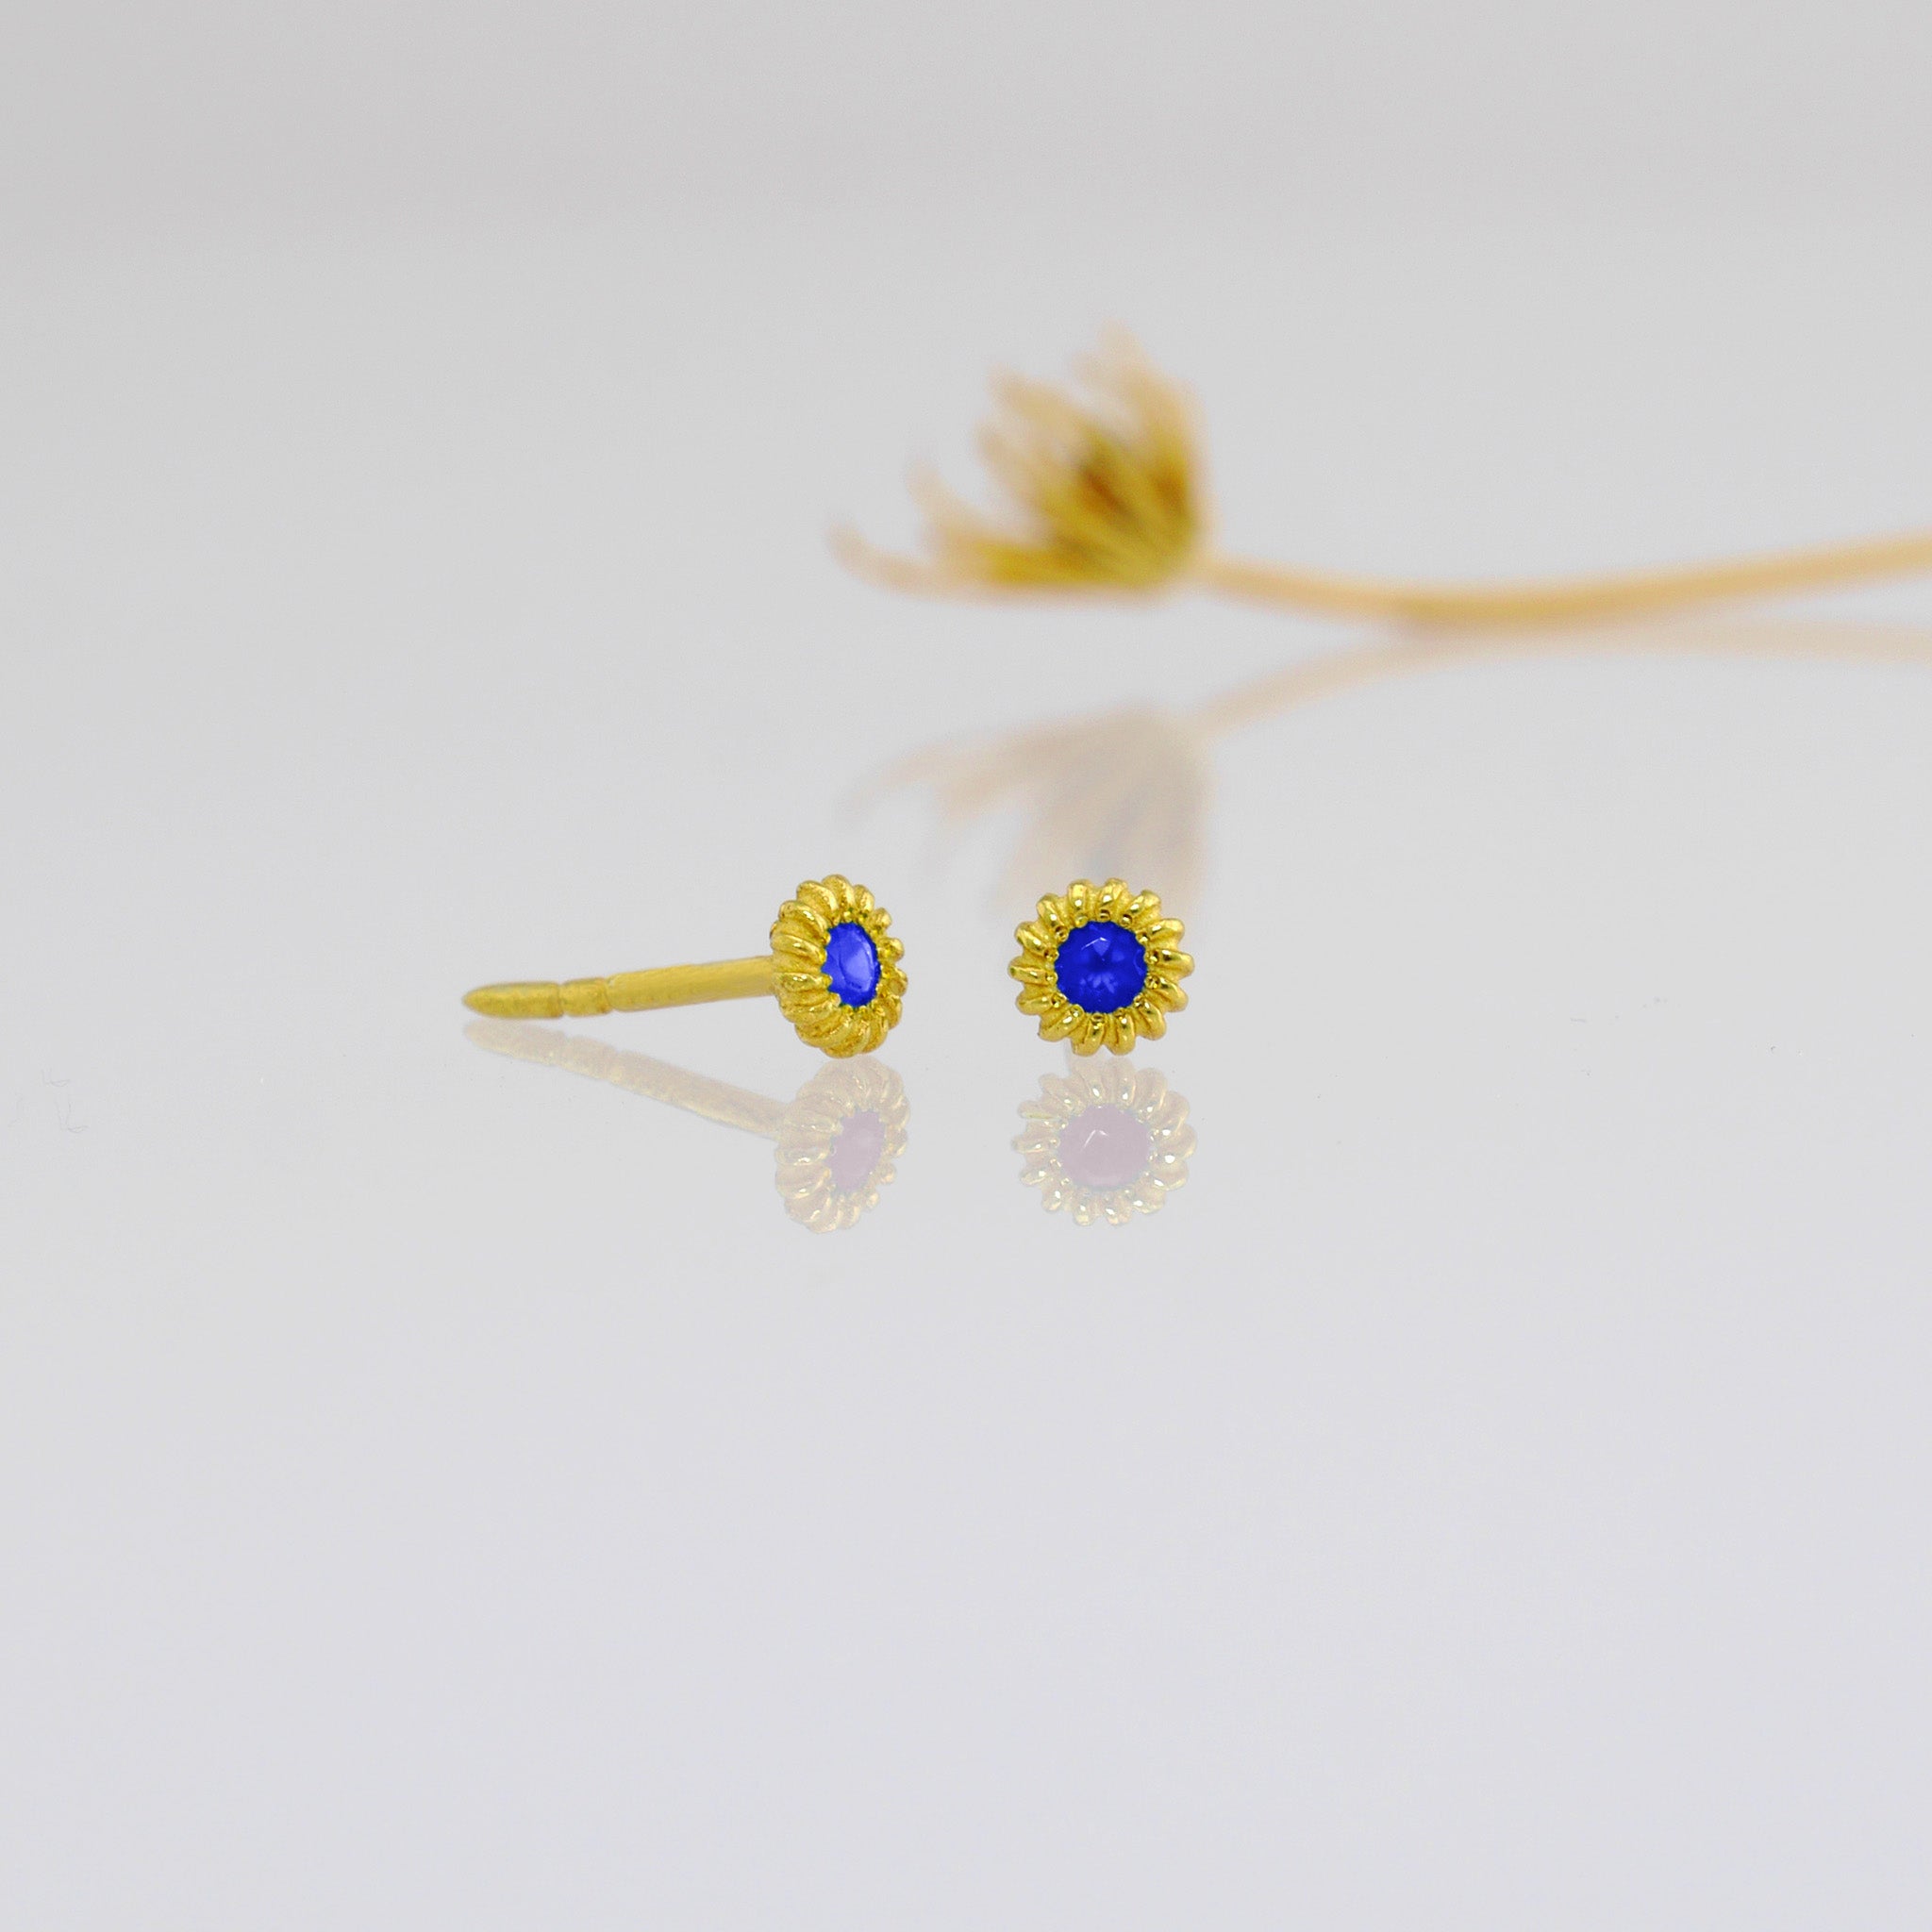 Tiny, coiled 18k gold studs with Sapphire.